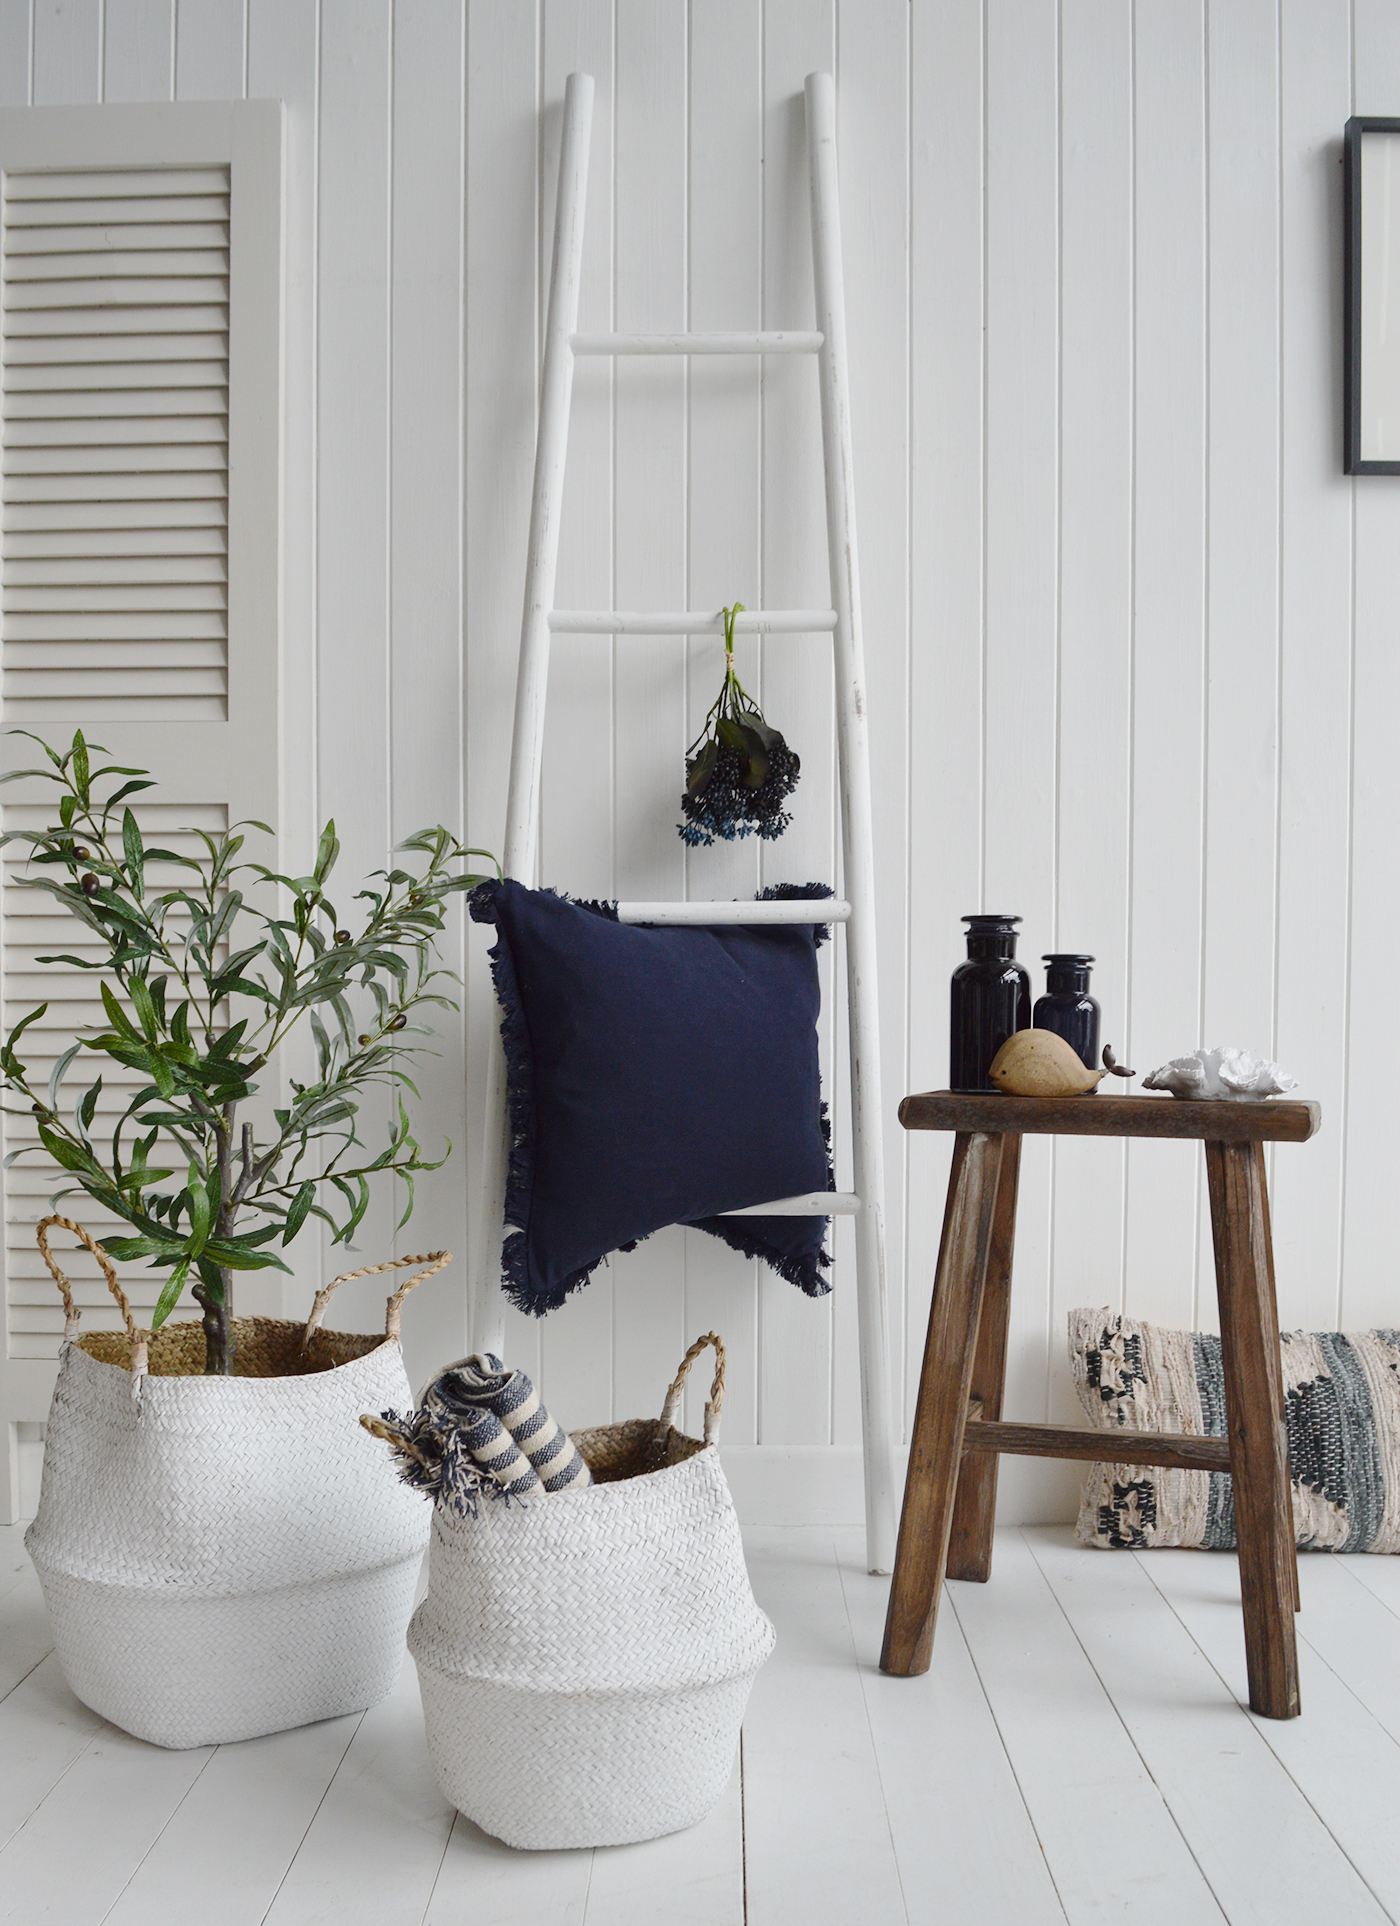 Classic Blue and White Interiors with the Proincetown white ladder against shades of blues in the accessories and cushions